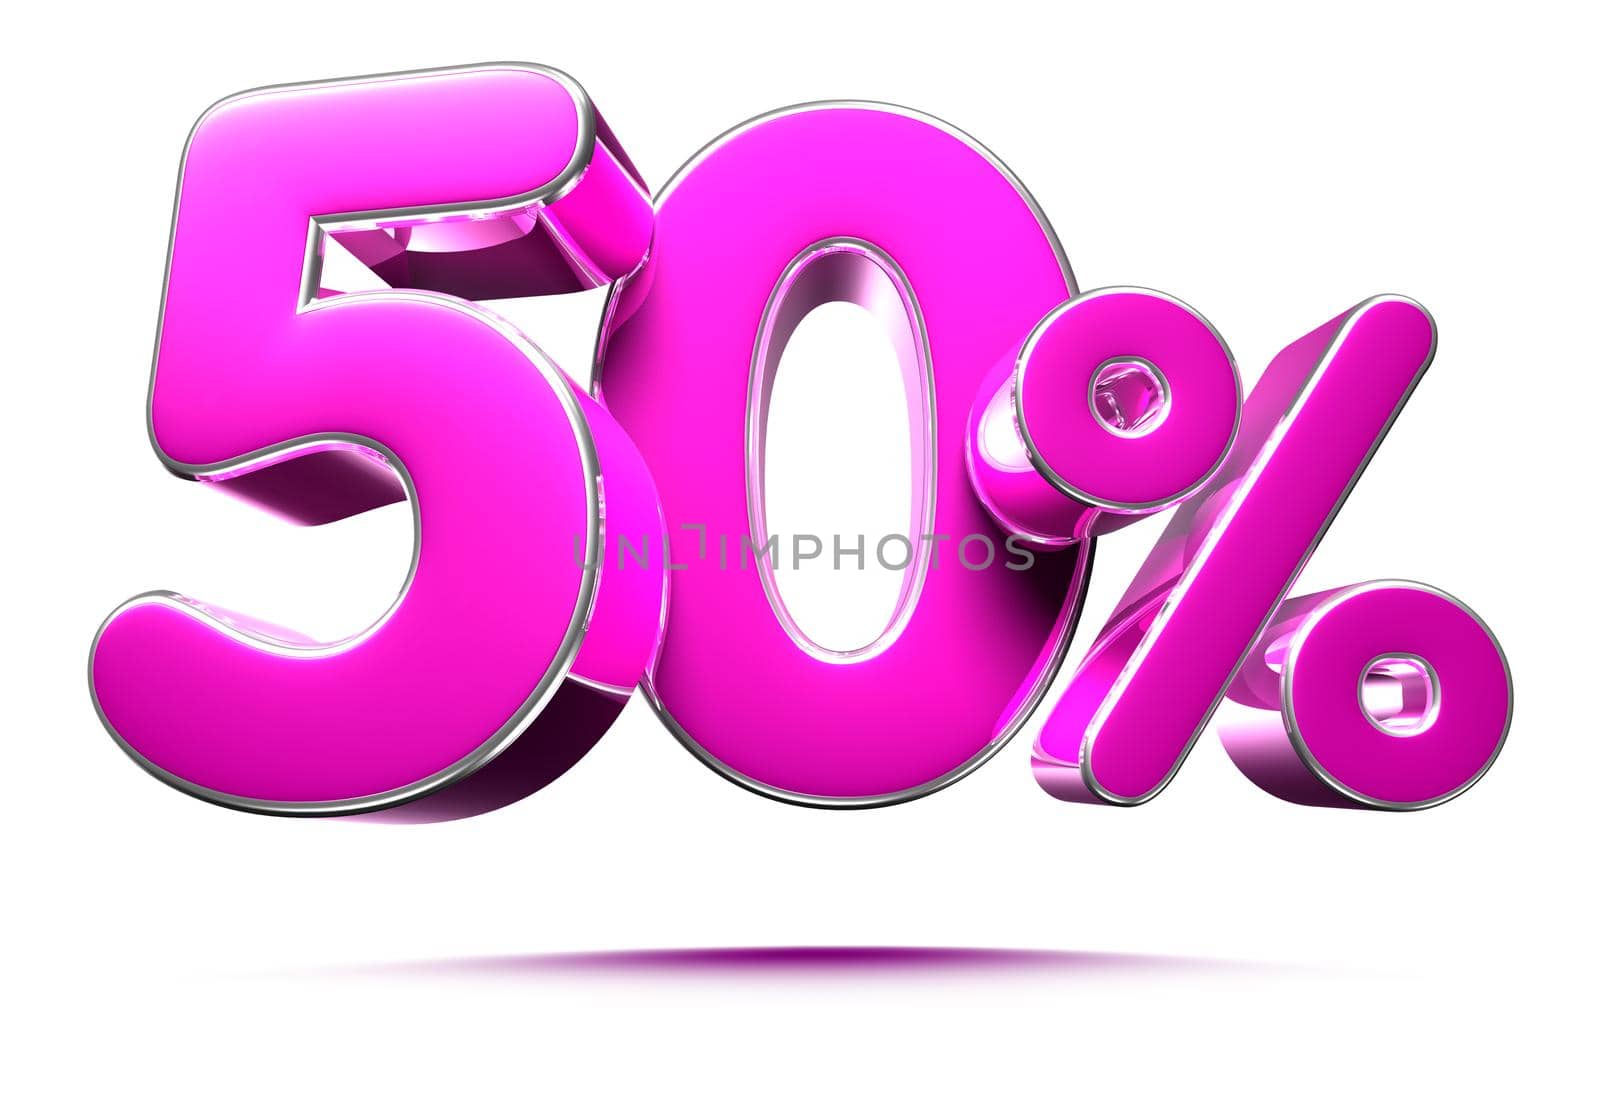 Pink 50 Percent 3d illustration Sign on White Background, Special Offer 50% Discount Tag, Sale Up to 50 Percent Off,share 50 percent,50% off storewide.With clipping path. by thitimontoyai